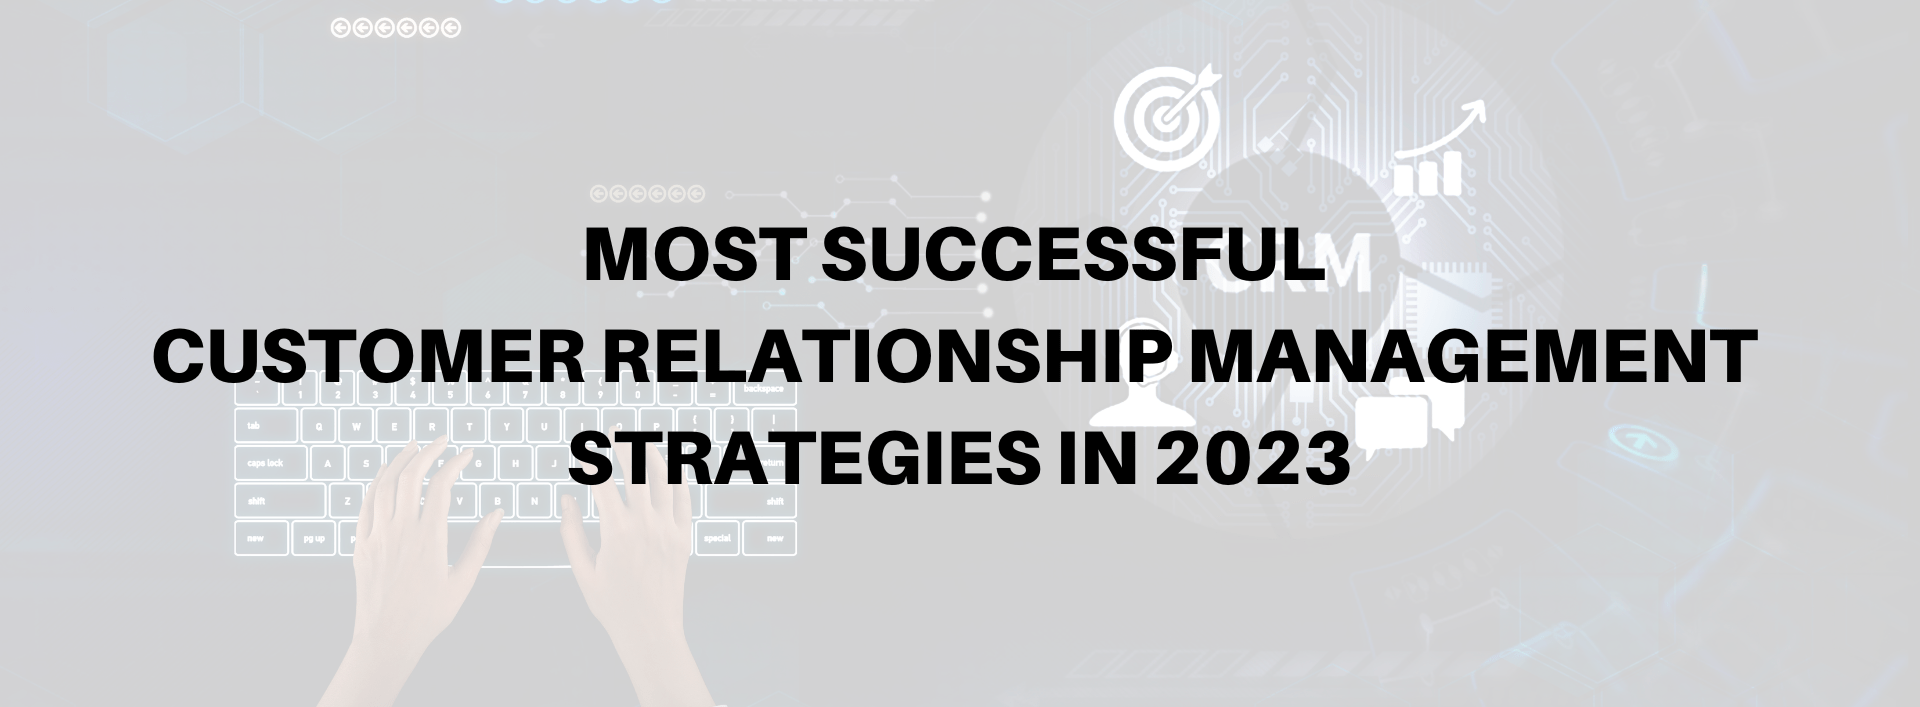 Most Successful Customer Relationship Management Strategies in 2023